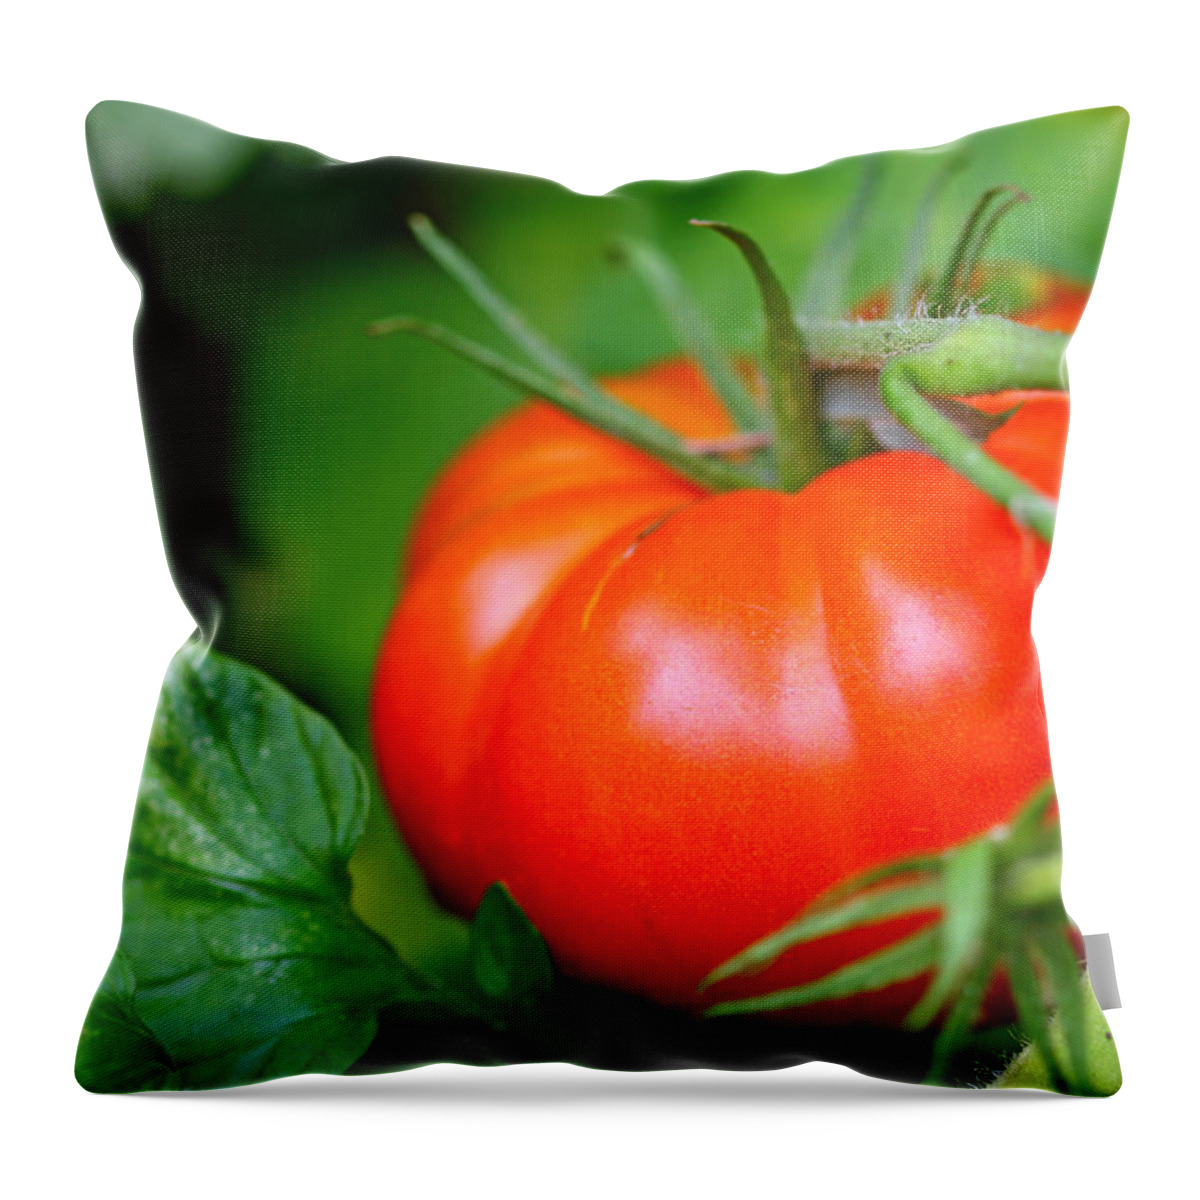 Food Throw Pillow featuring the photograph Tomato On The Vine by Debbie Oppermann